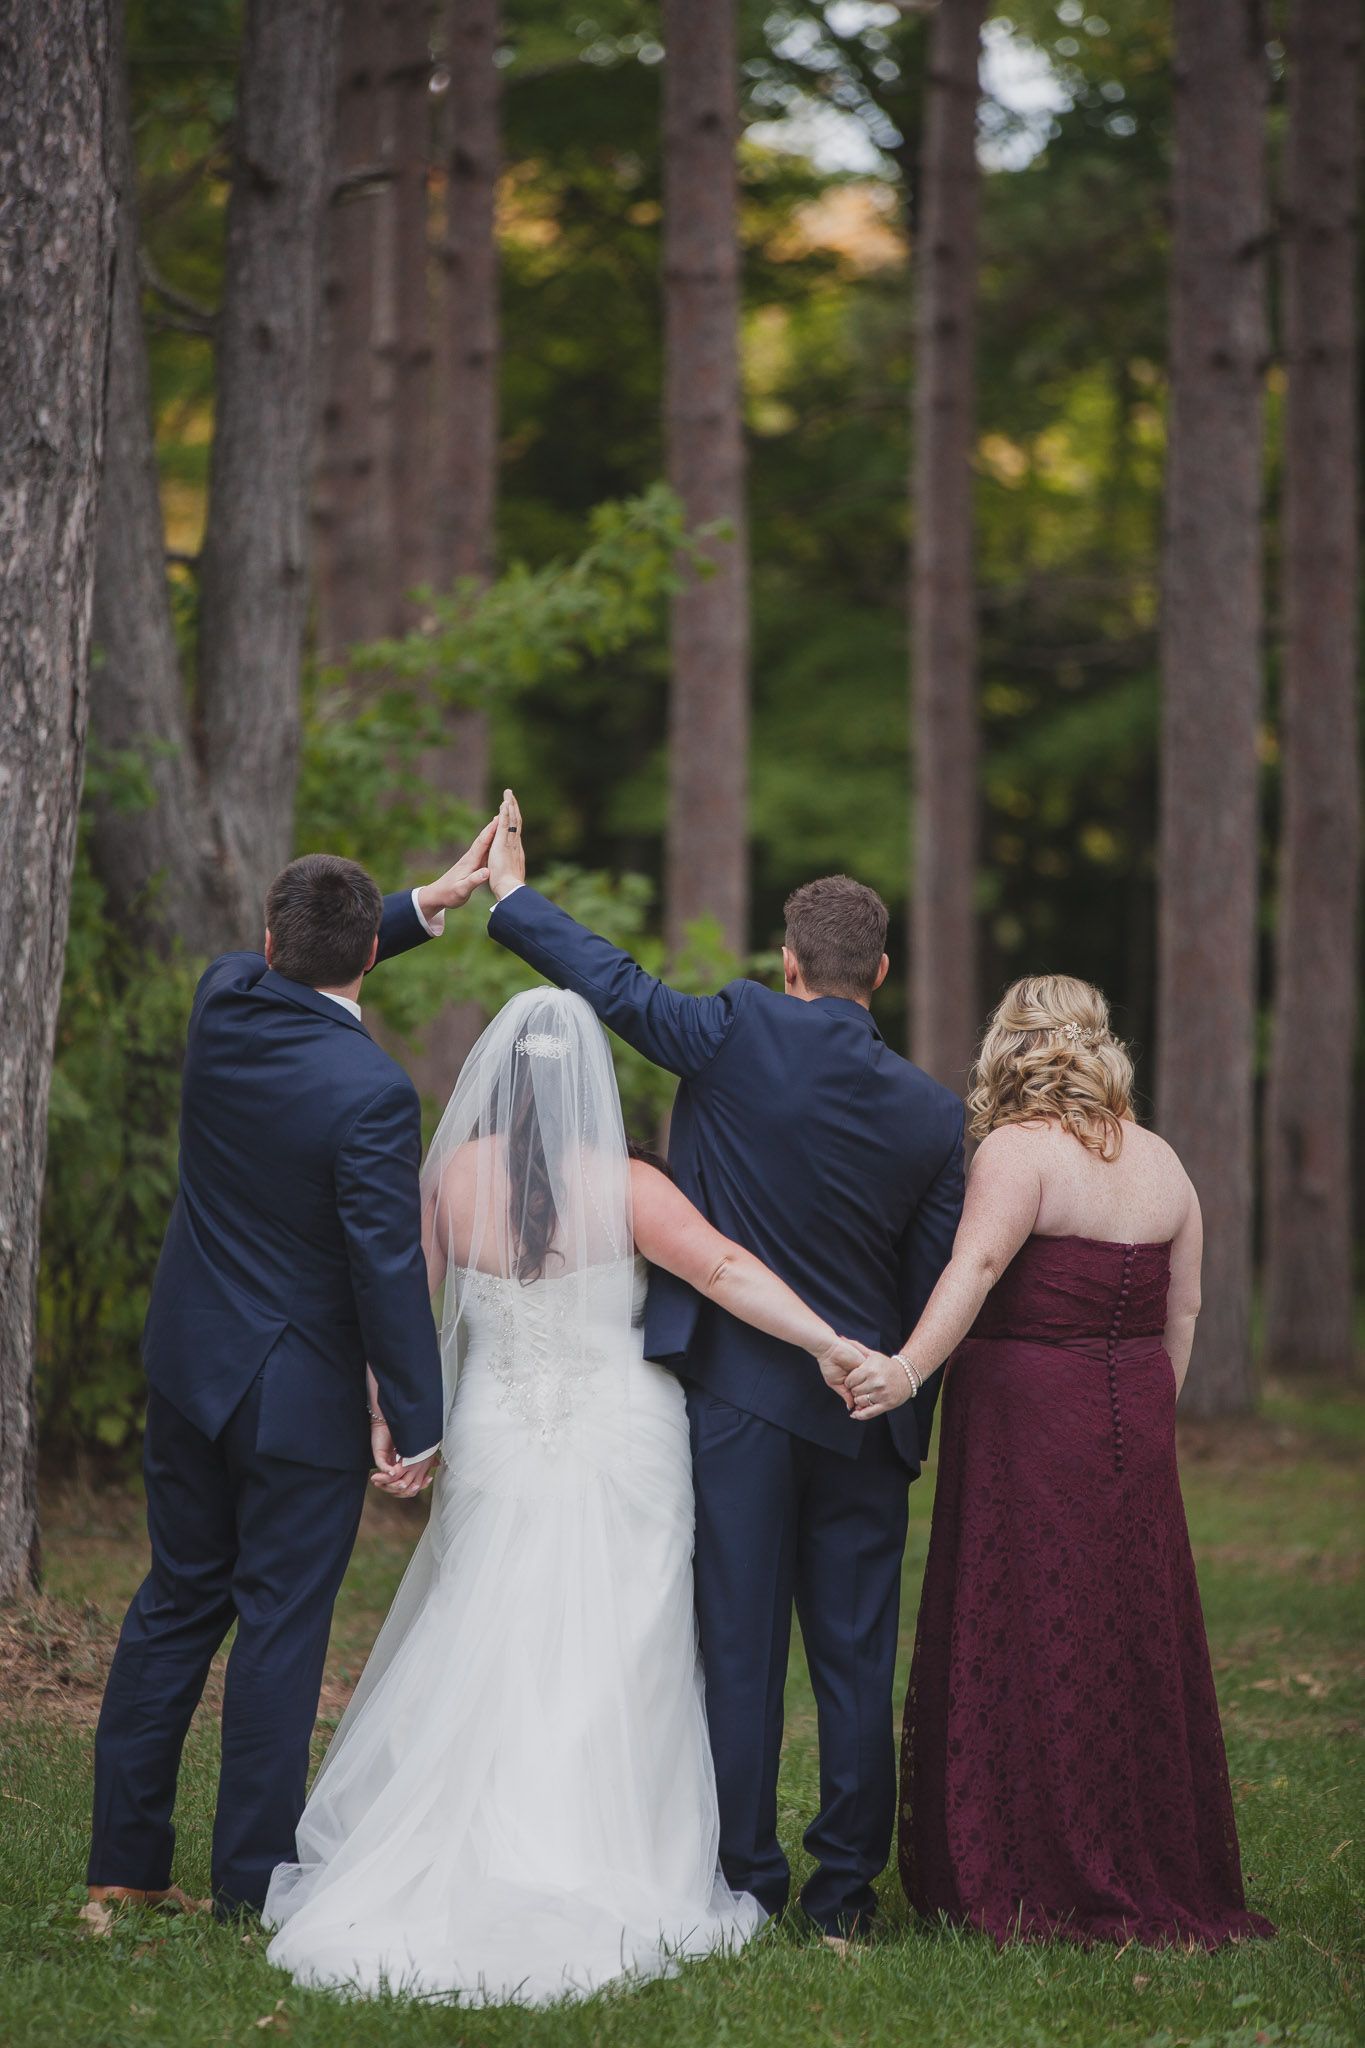 50+ Wedding Poses to Capture the Most Special Moments of Your Big Day